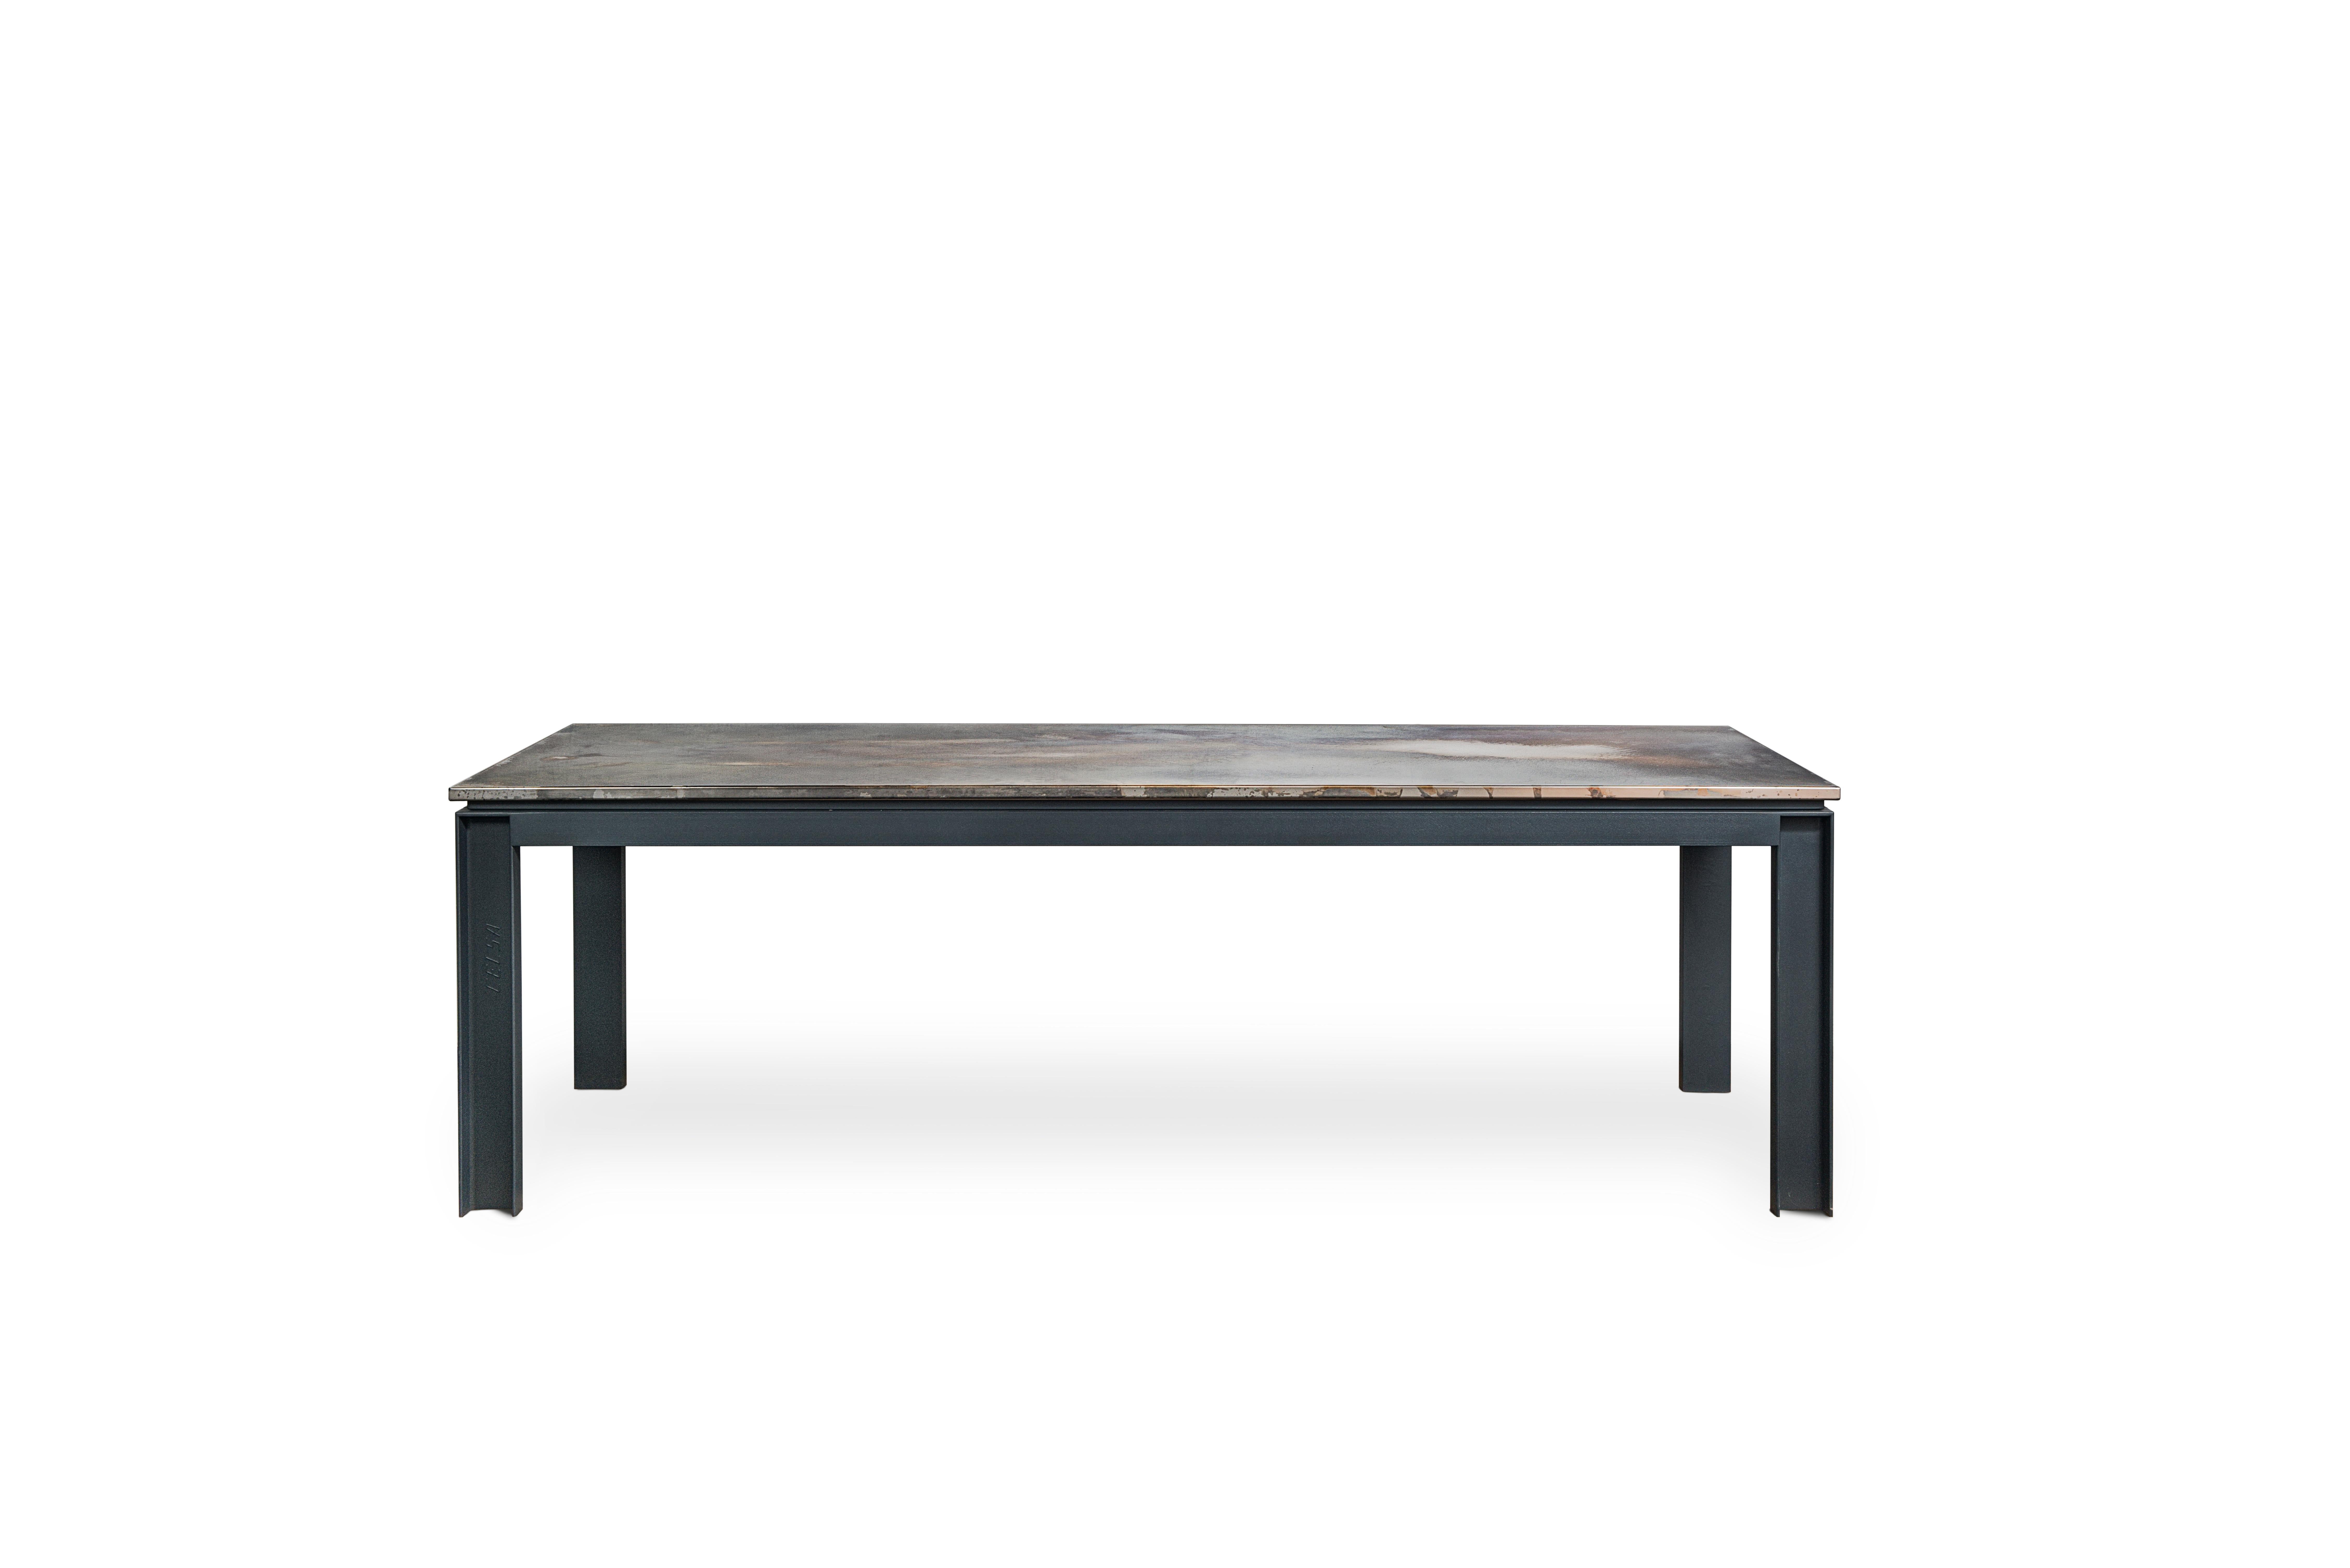 Gemona Dining Table by Delvis Unlimited